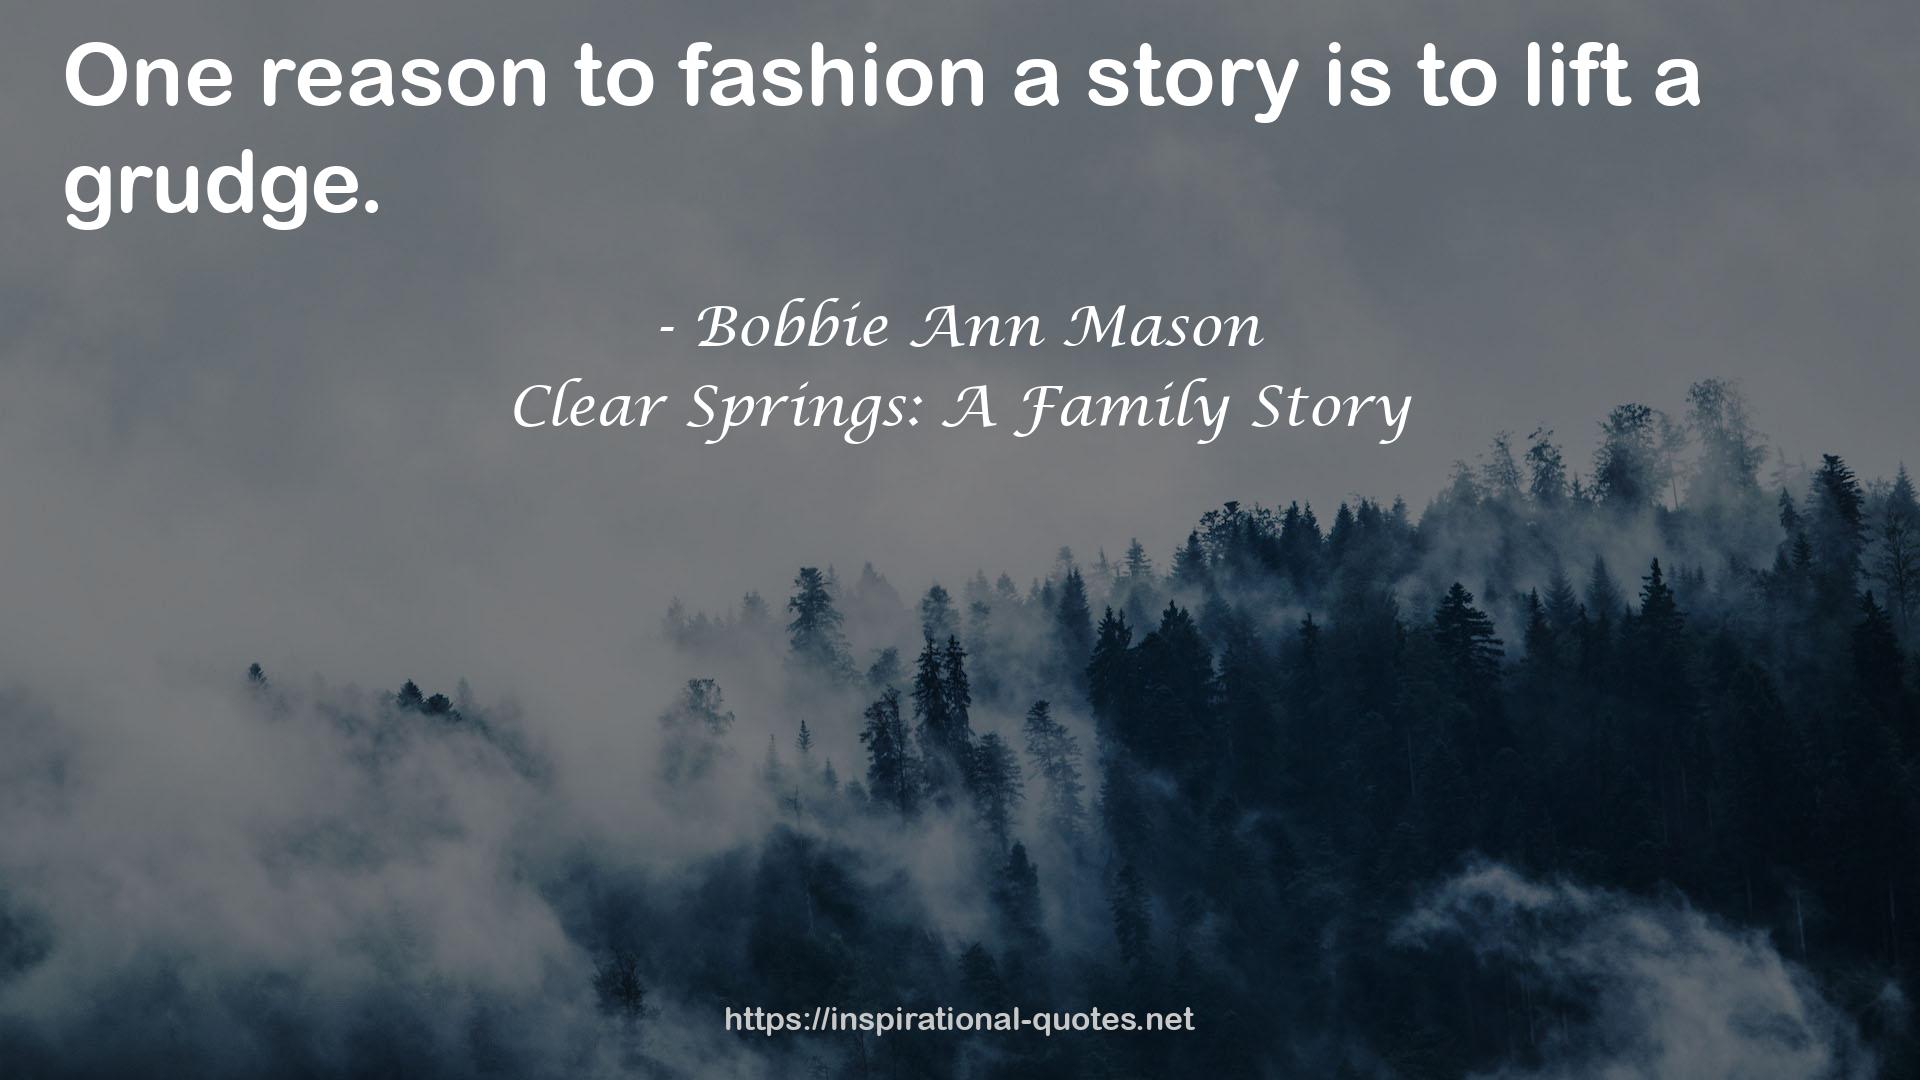 Clear Springs: A Family Story QUOTES